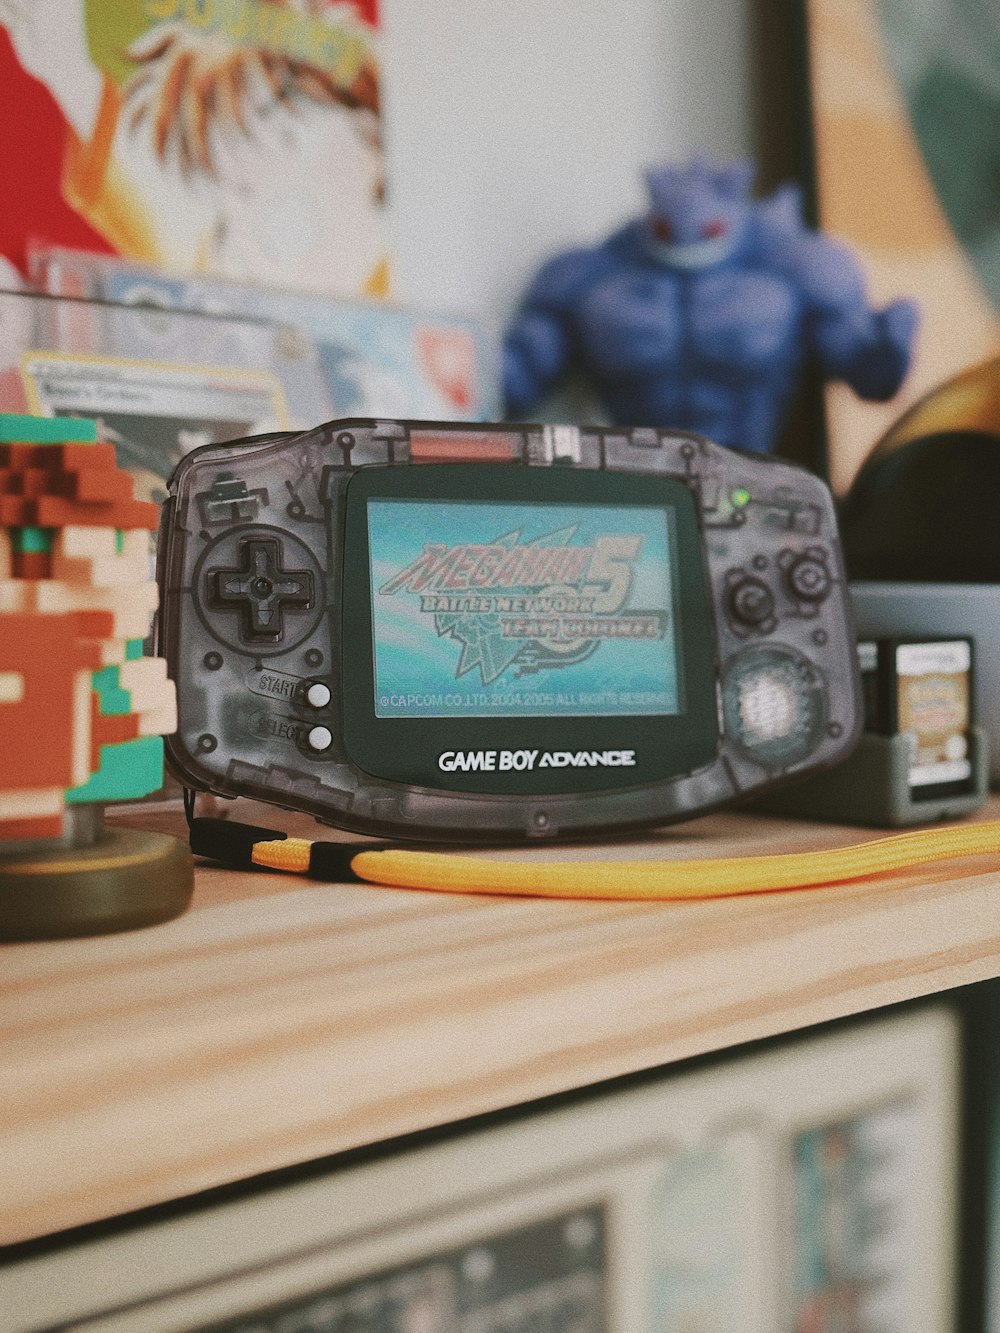 a game boy advance sitting on top of a table